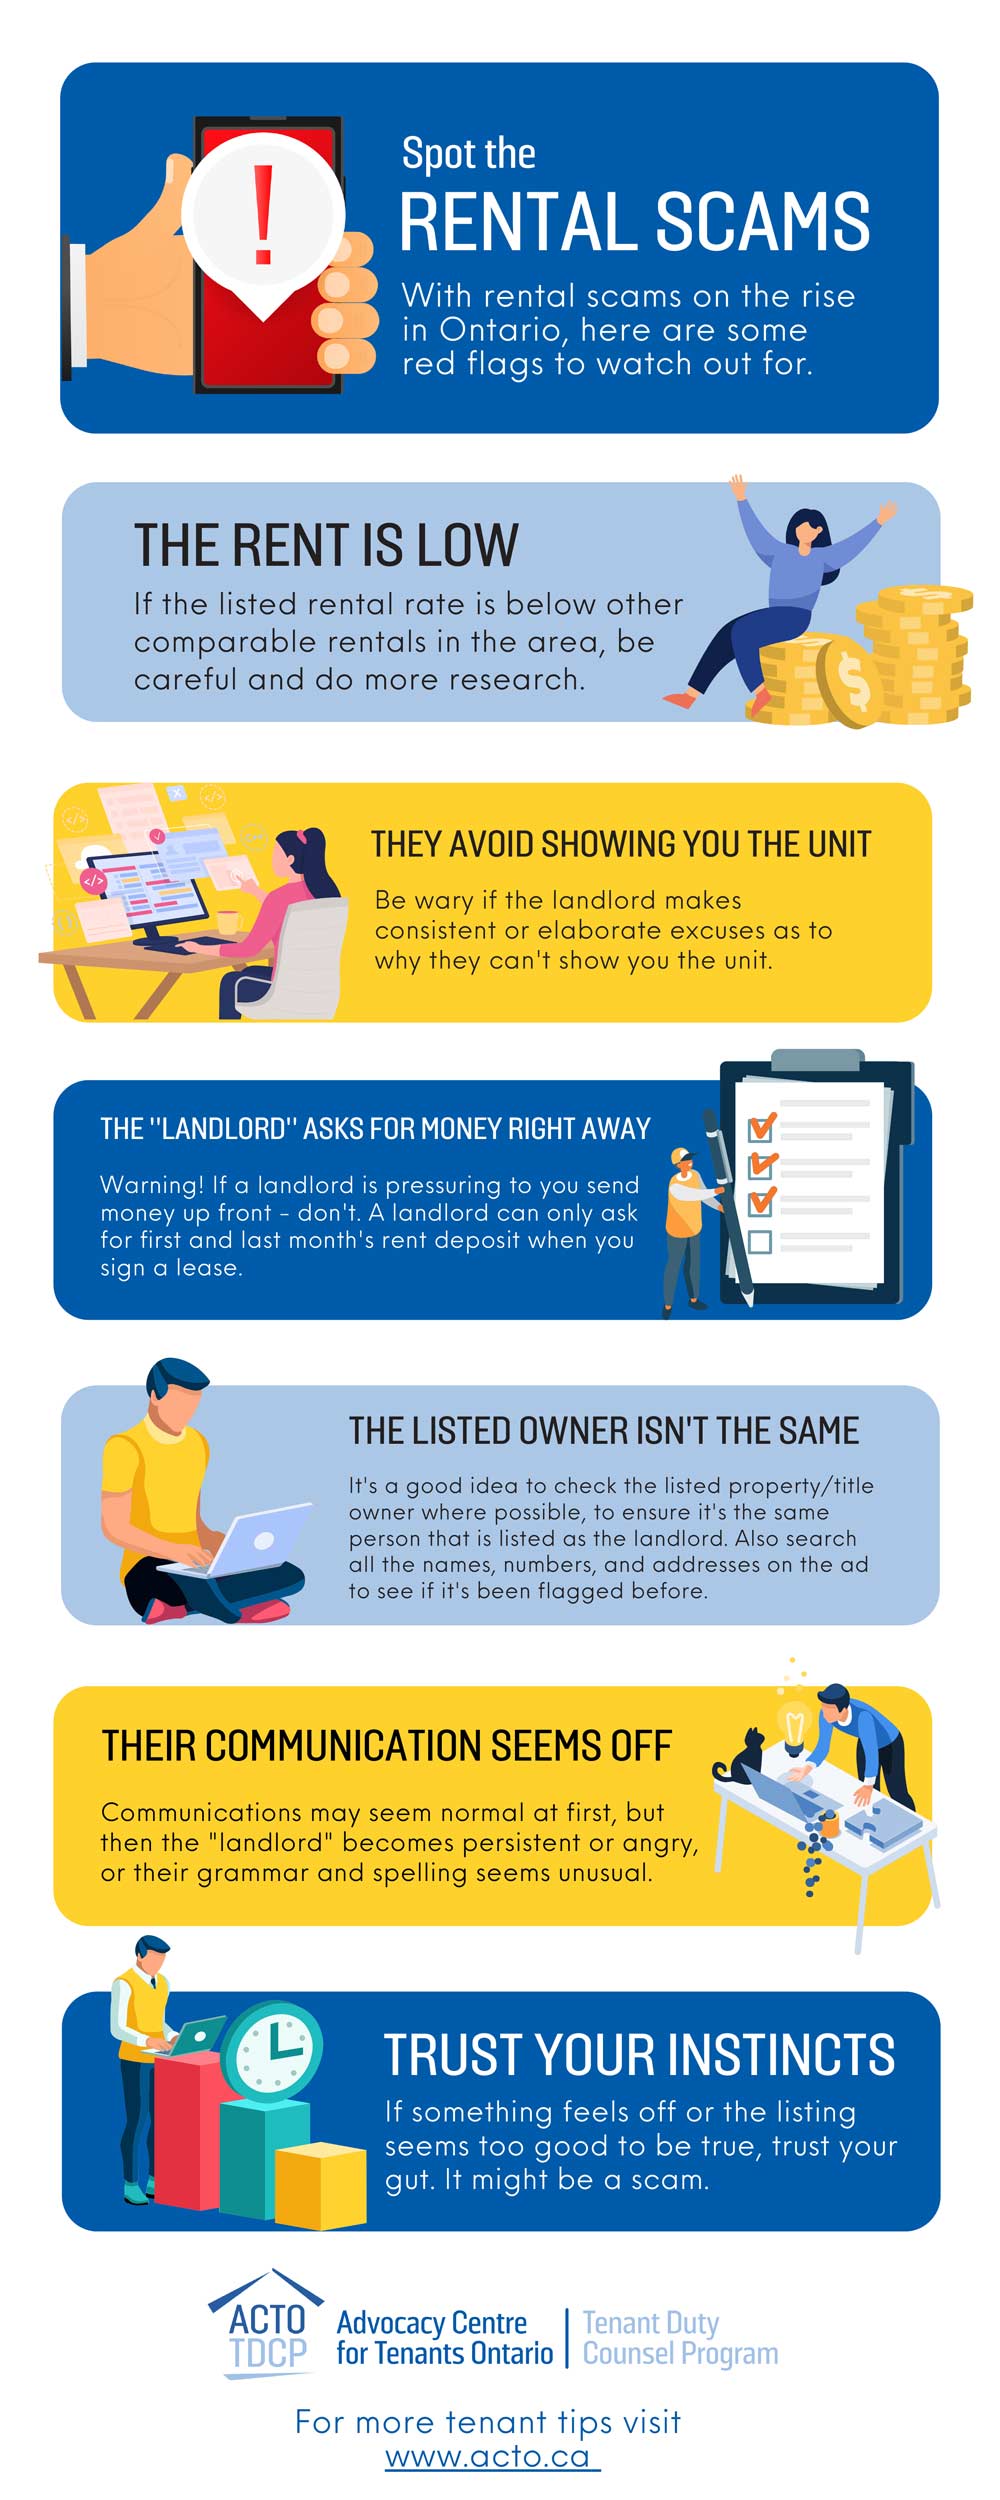 Spot the rental scams (infographic)